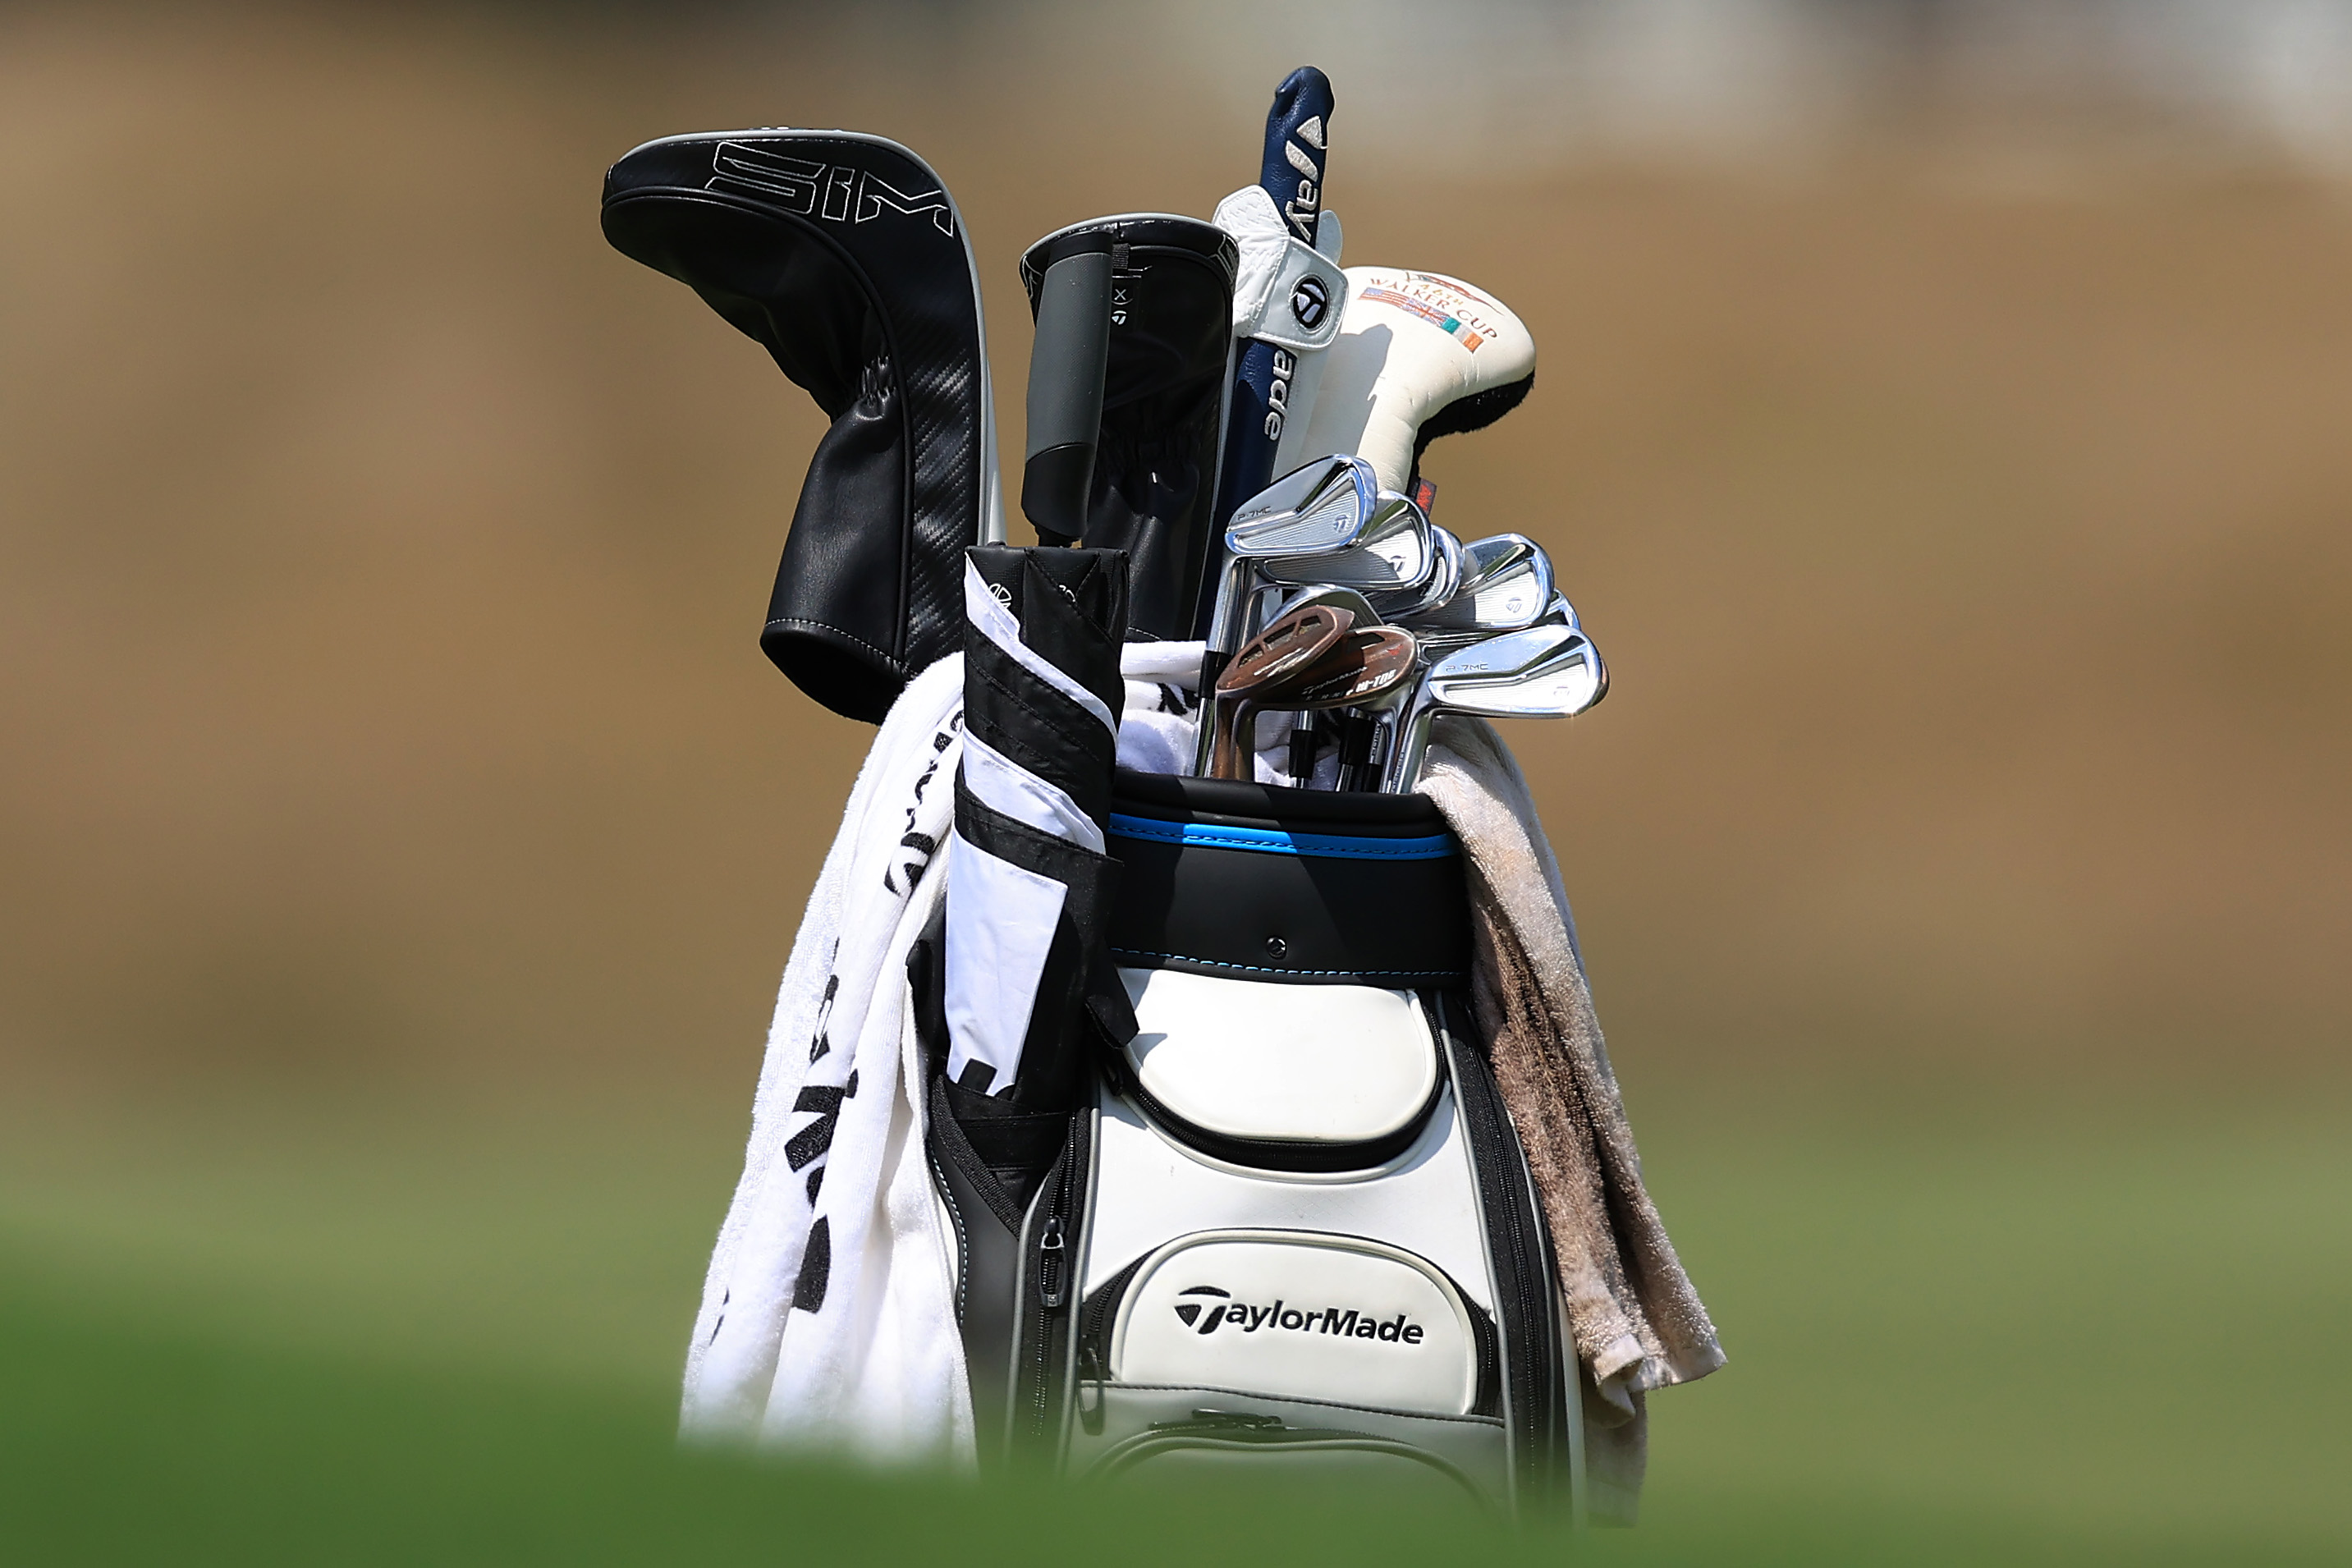 Botsing Weg bedrijf Tips for Traveling with your Golf Clubs